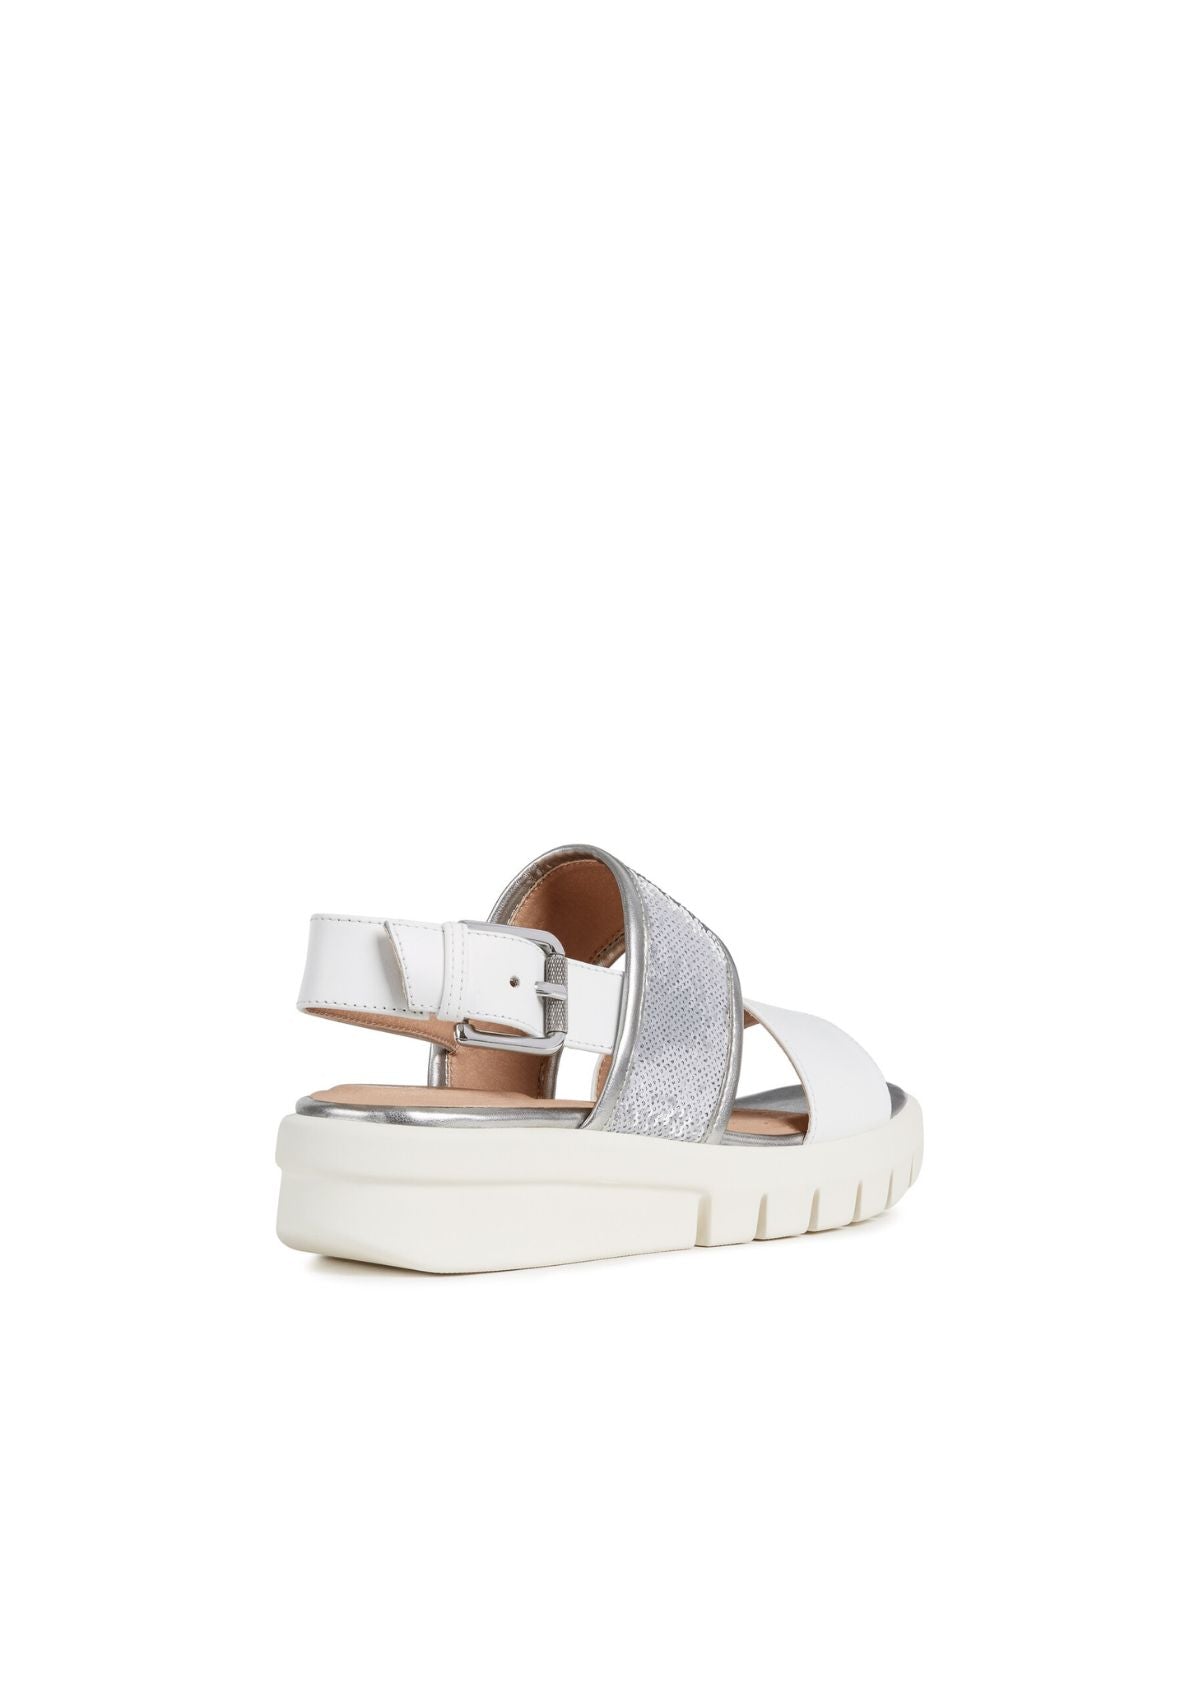 Geox Woman Sandals WEMBLEY White Silver side back